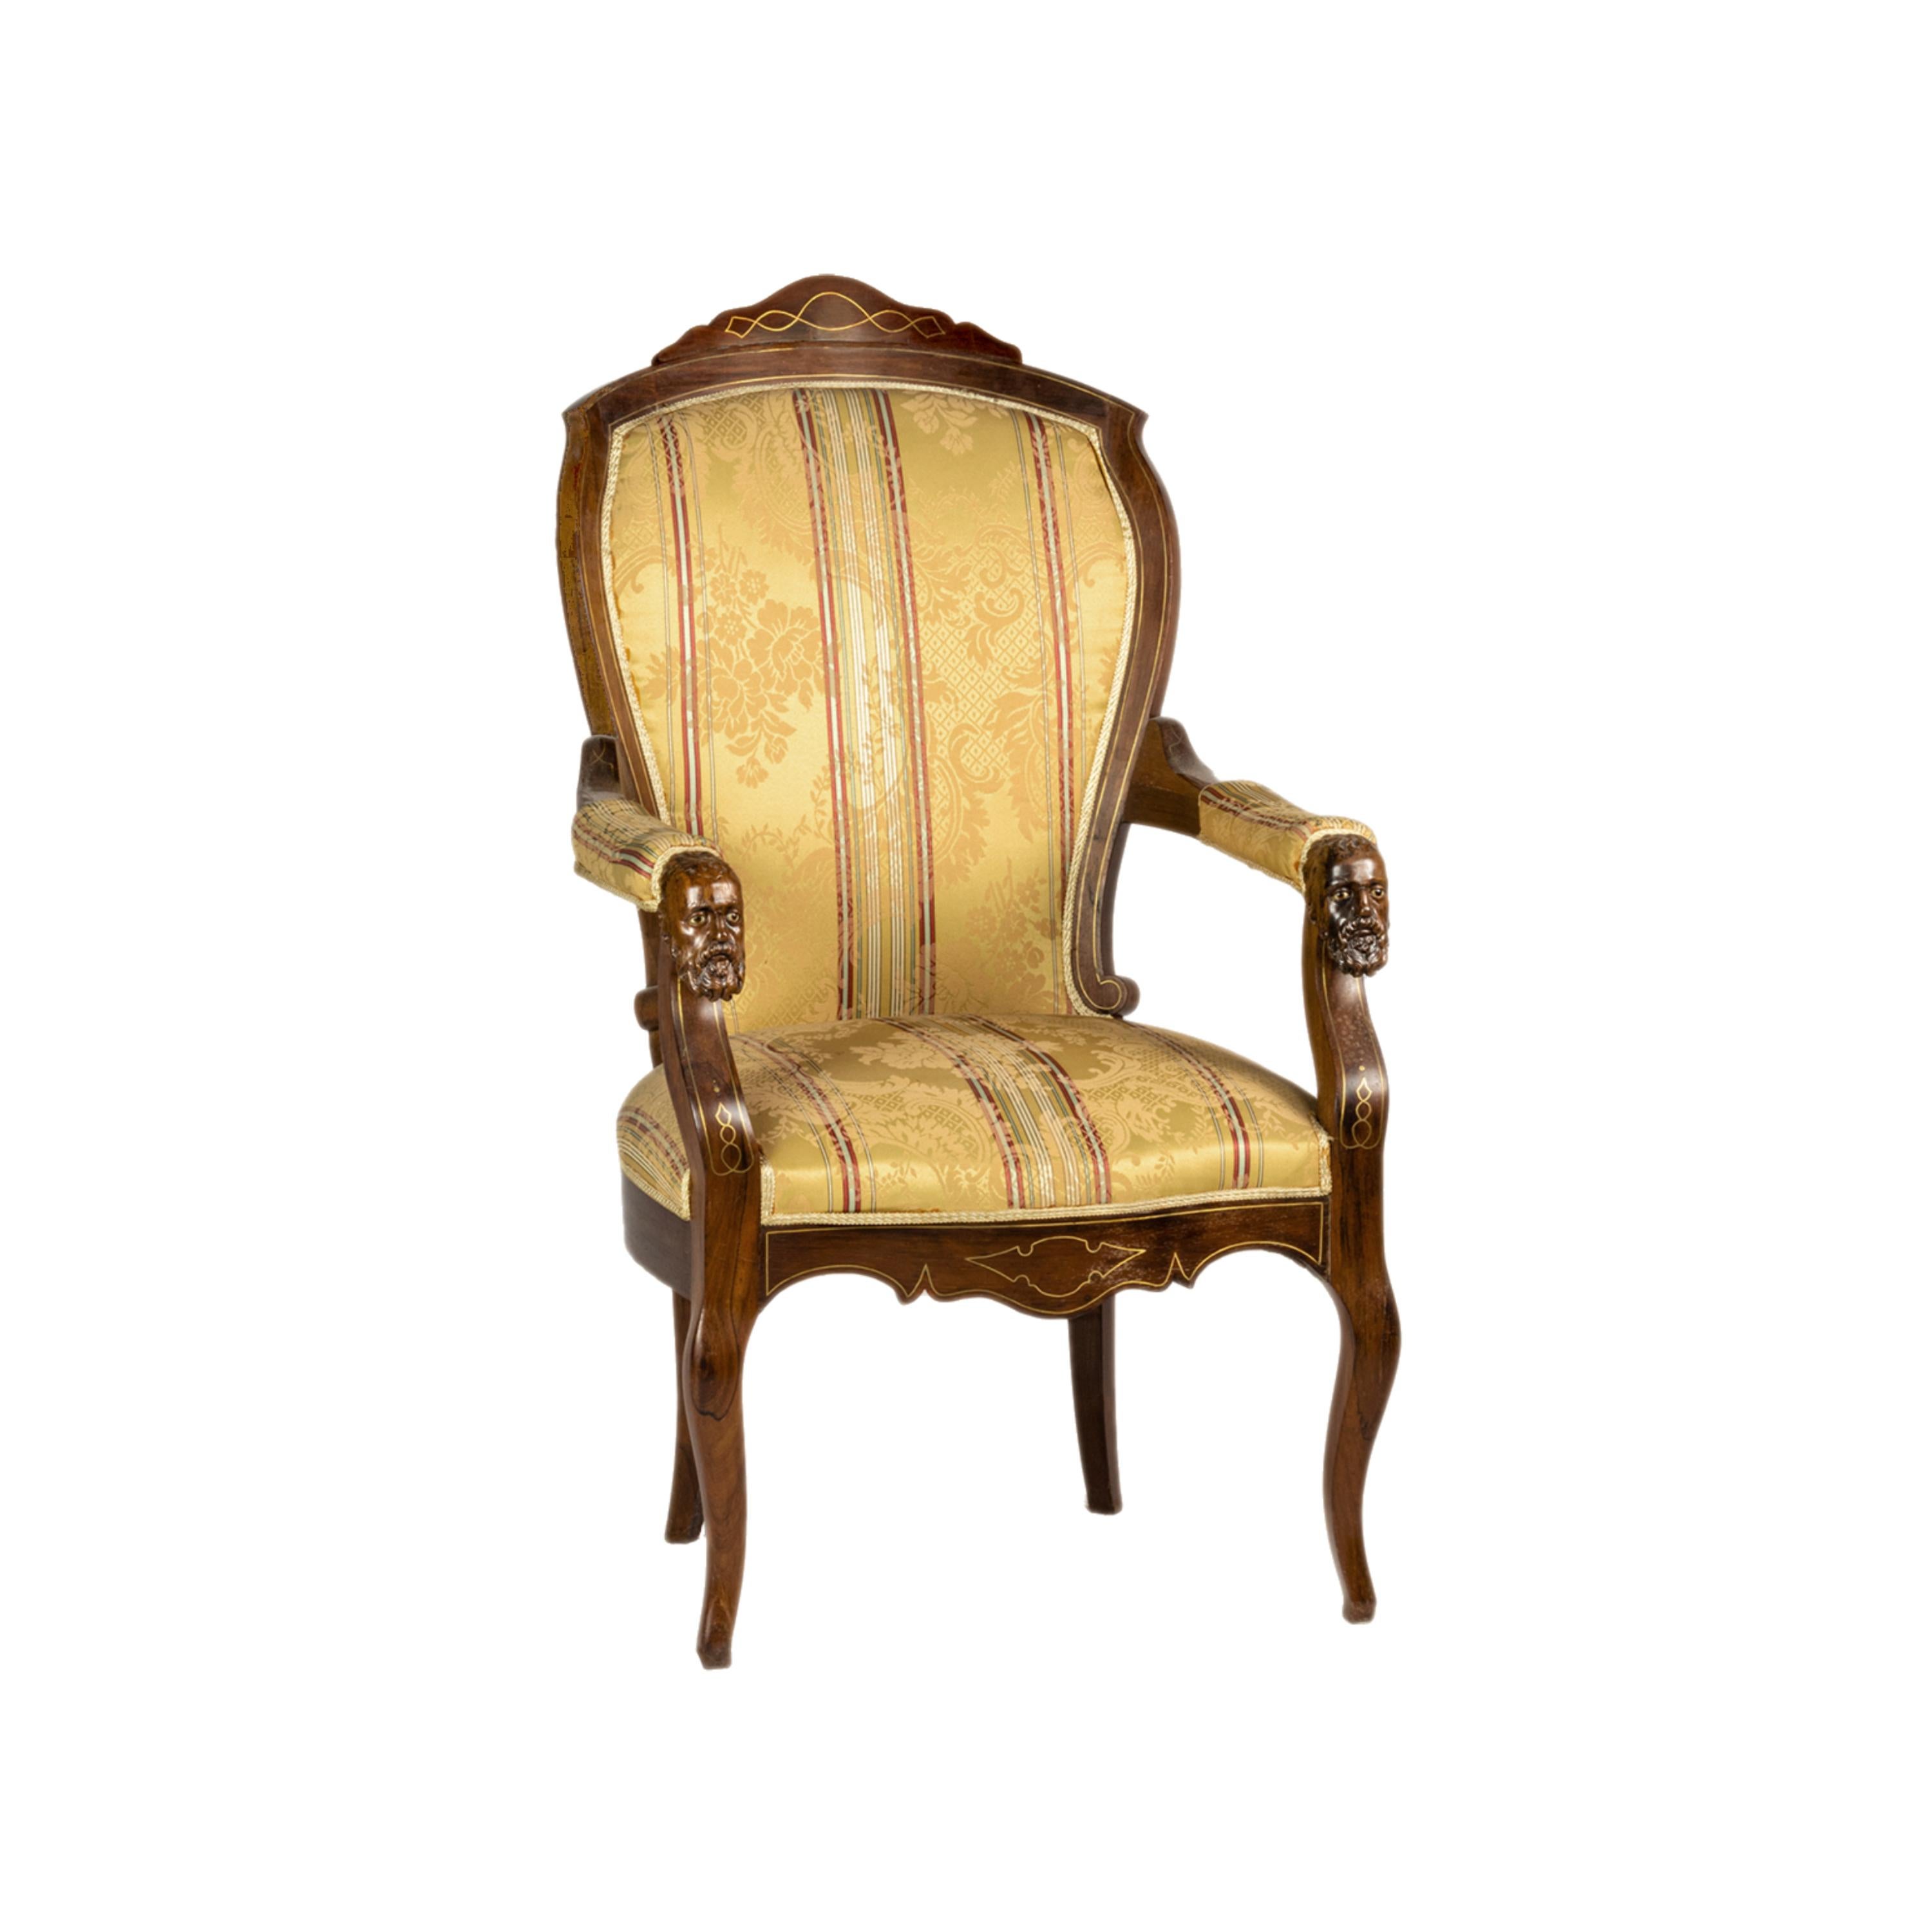 A pair of two large and wide armchairs: rare and in pristine conditions pair of Voltaire armchairs, richly carved armrests with male beard faces in orientalistic style.  An impeccably maintained luxury yellow upholstery, yellow marquetry “thread”